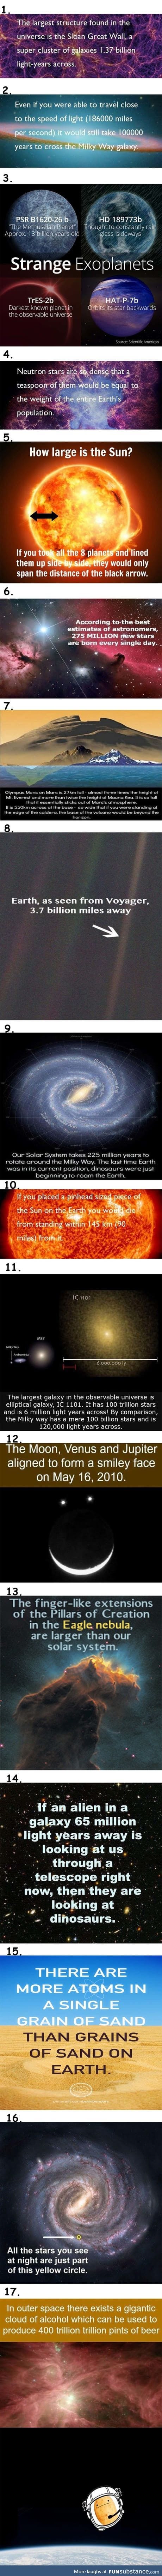 17 Awesome fact about our Universe.